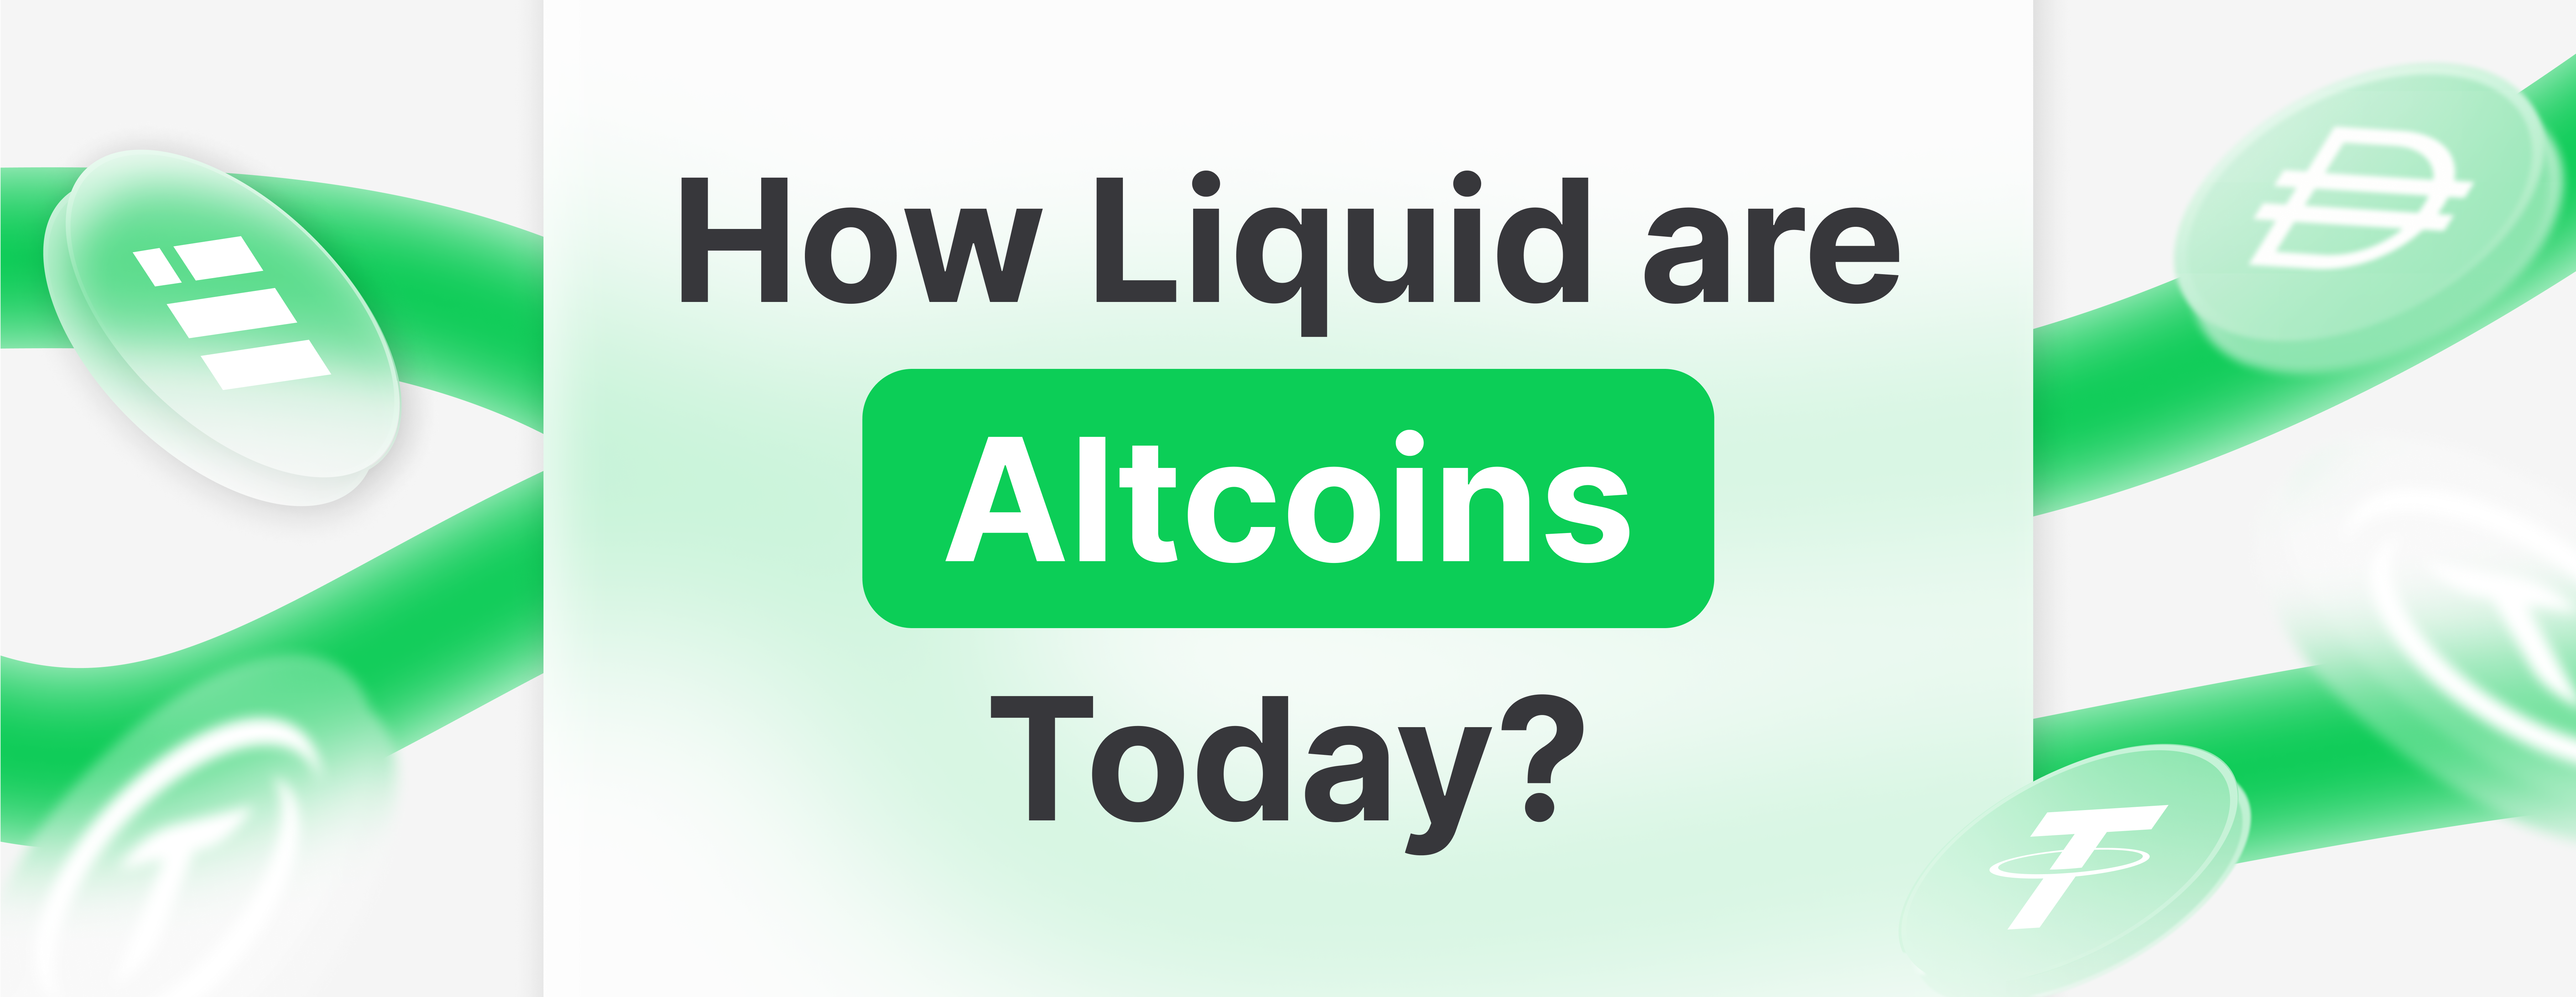 How Liquid Are Altcoins Today